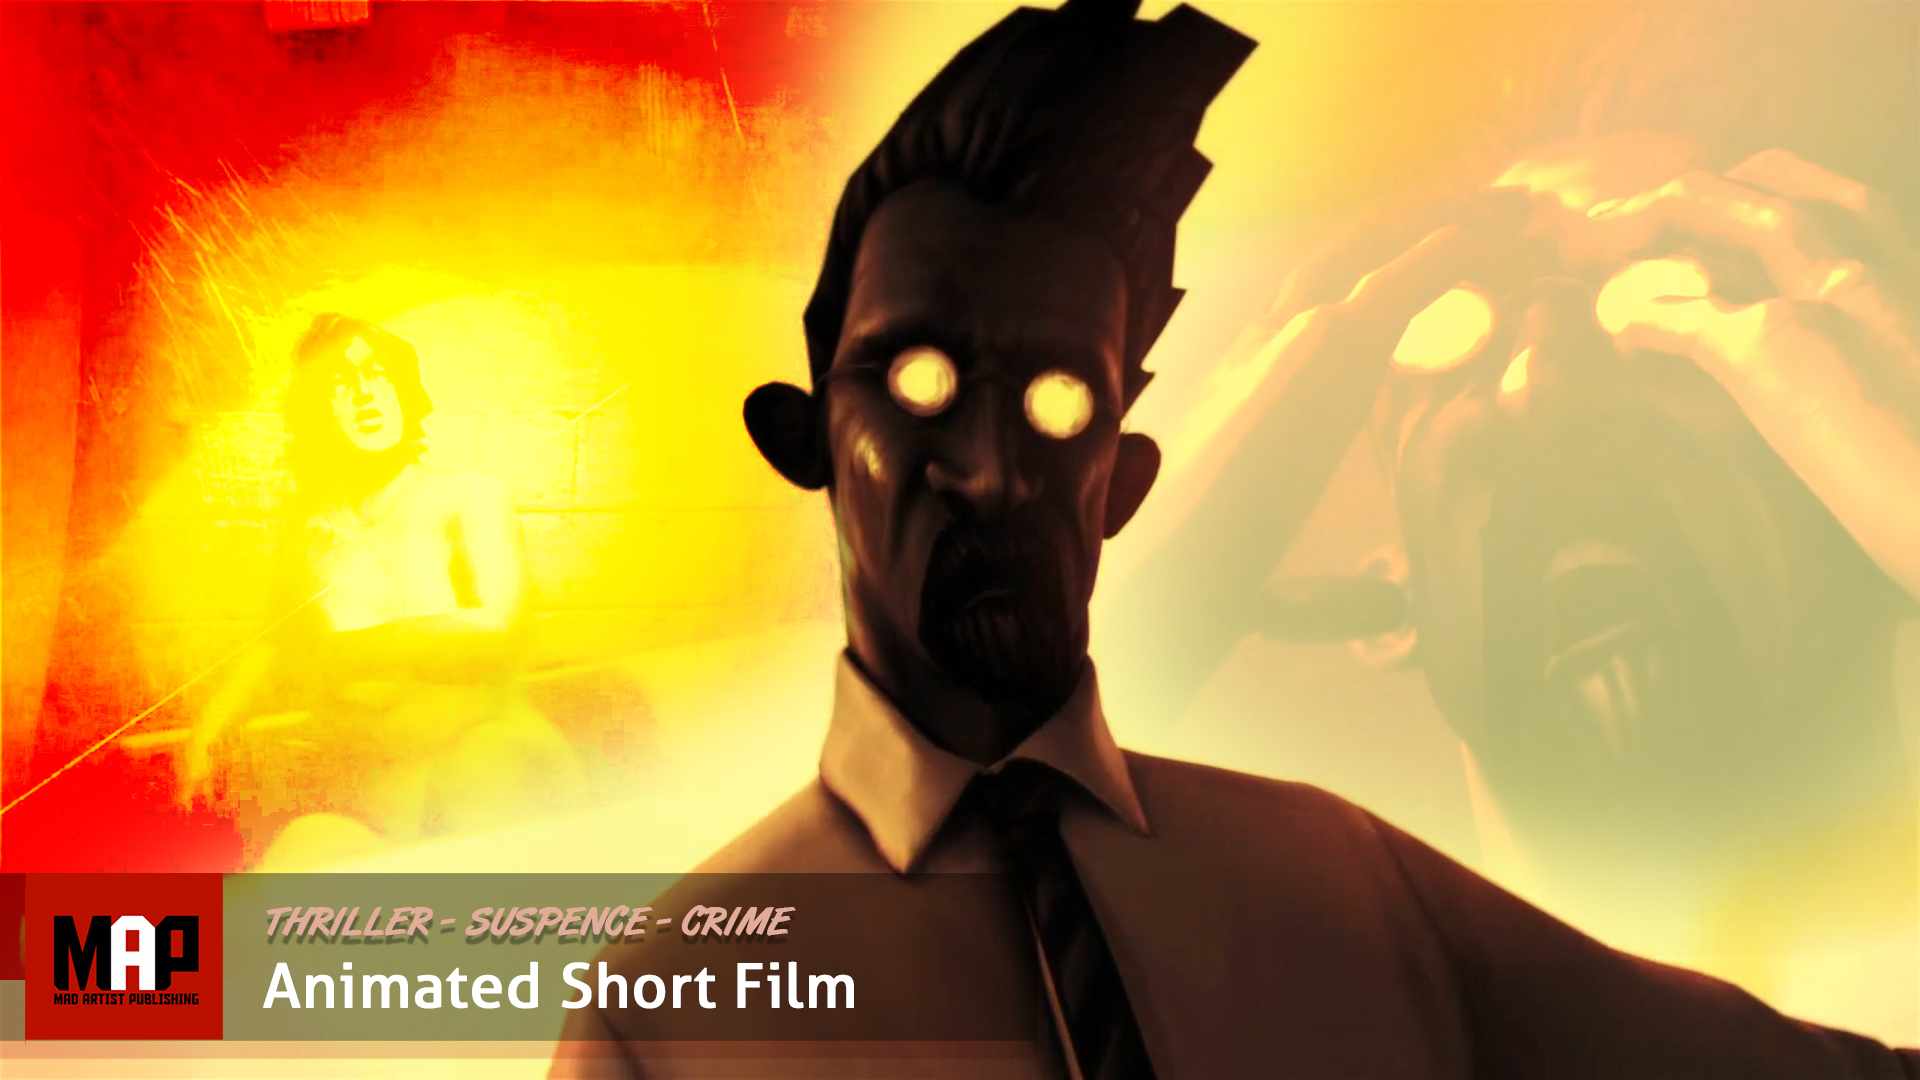 CGI 3d Animated Short Film ** RED ** Suspence Thriller by Alexander  Charleux & Supinfocom Team